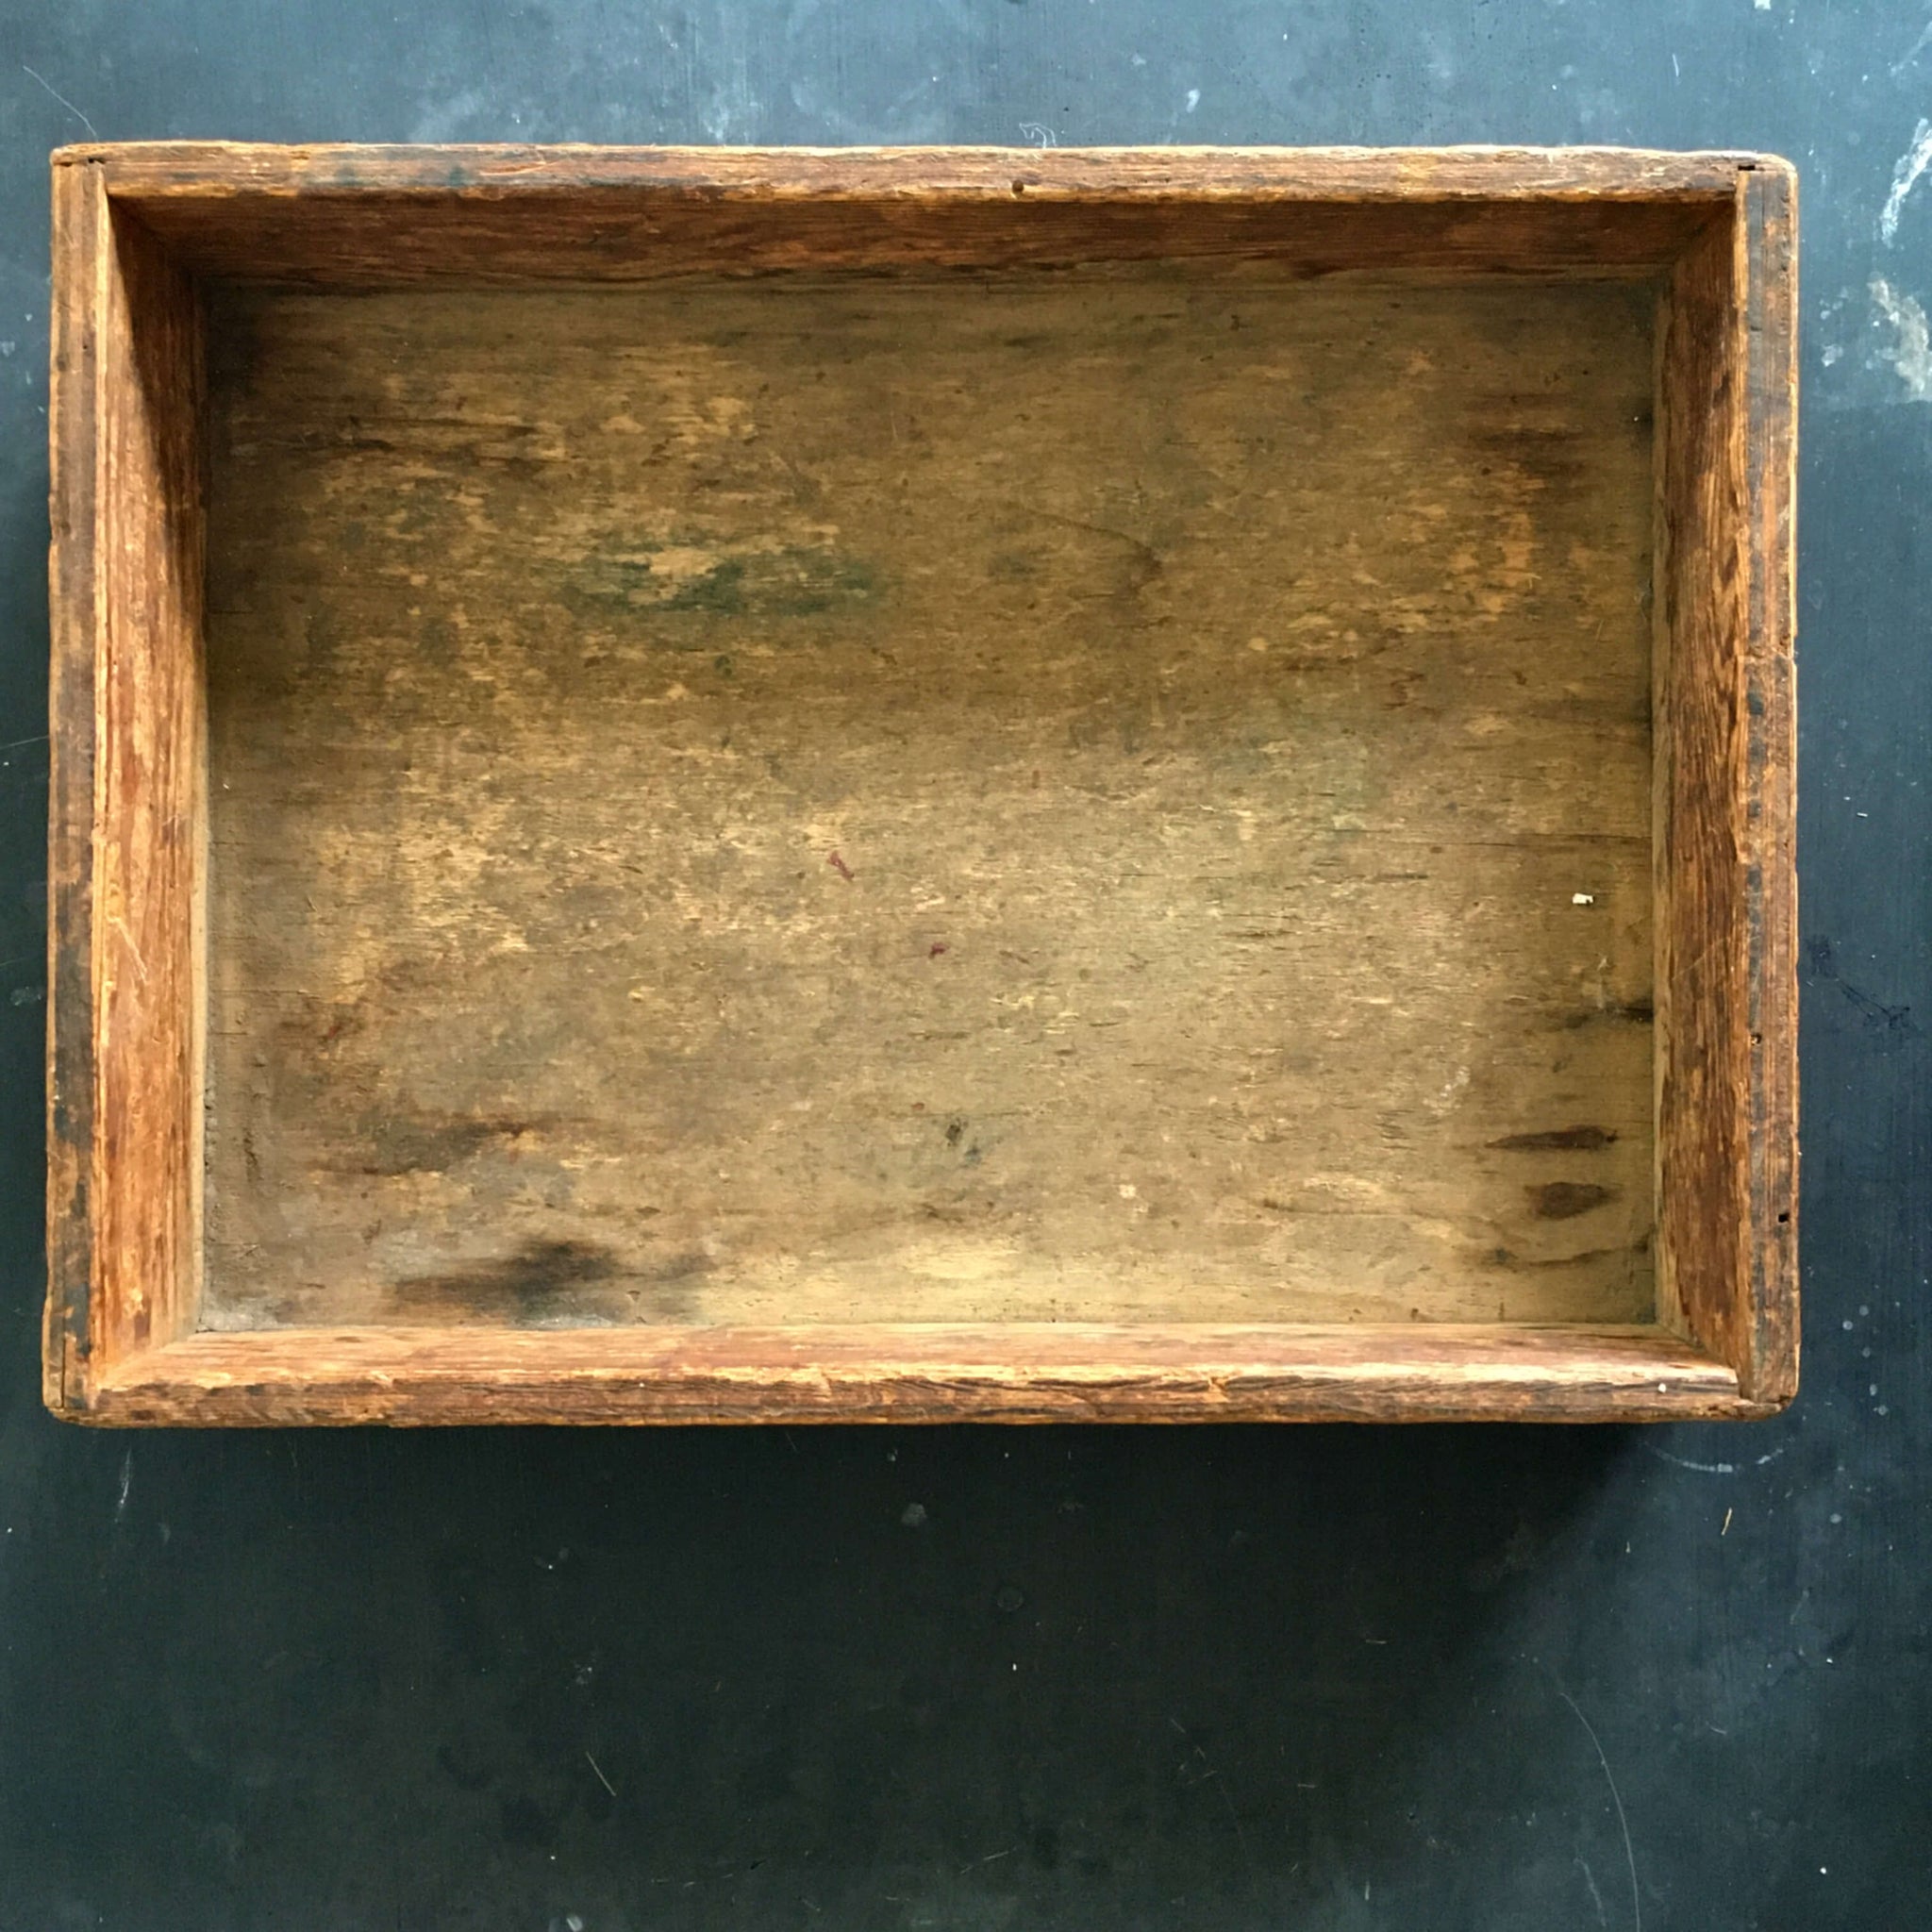 Antique Wood Tray Crate Box - 11x15 Storage Container Circa early 1900's